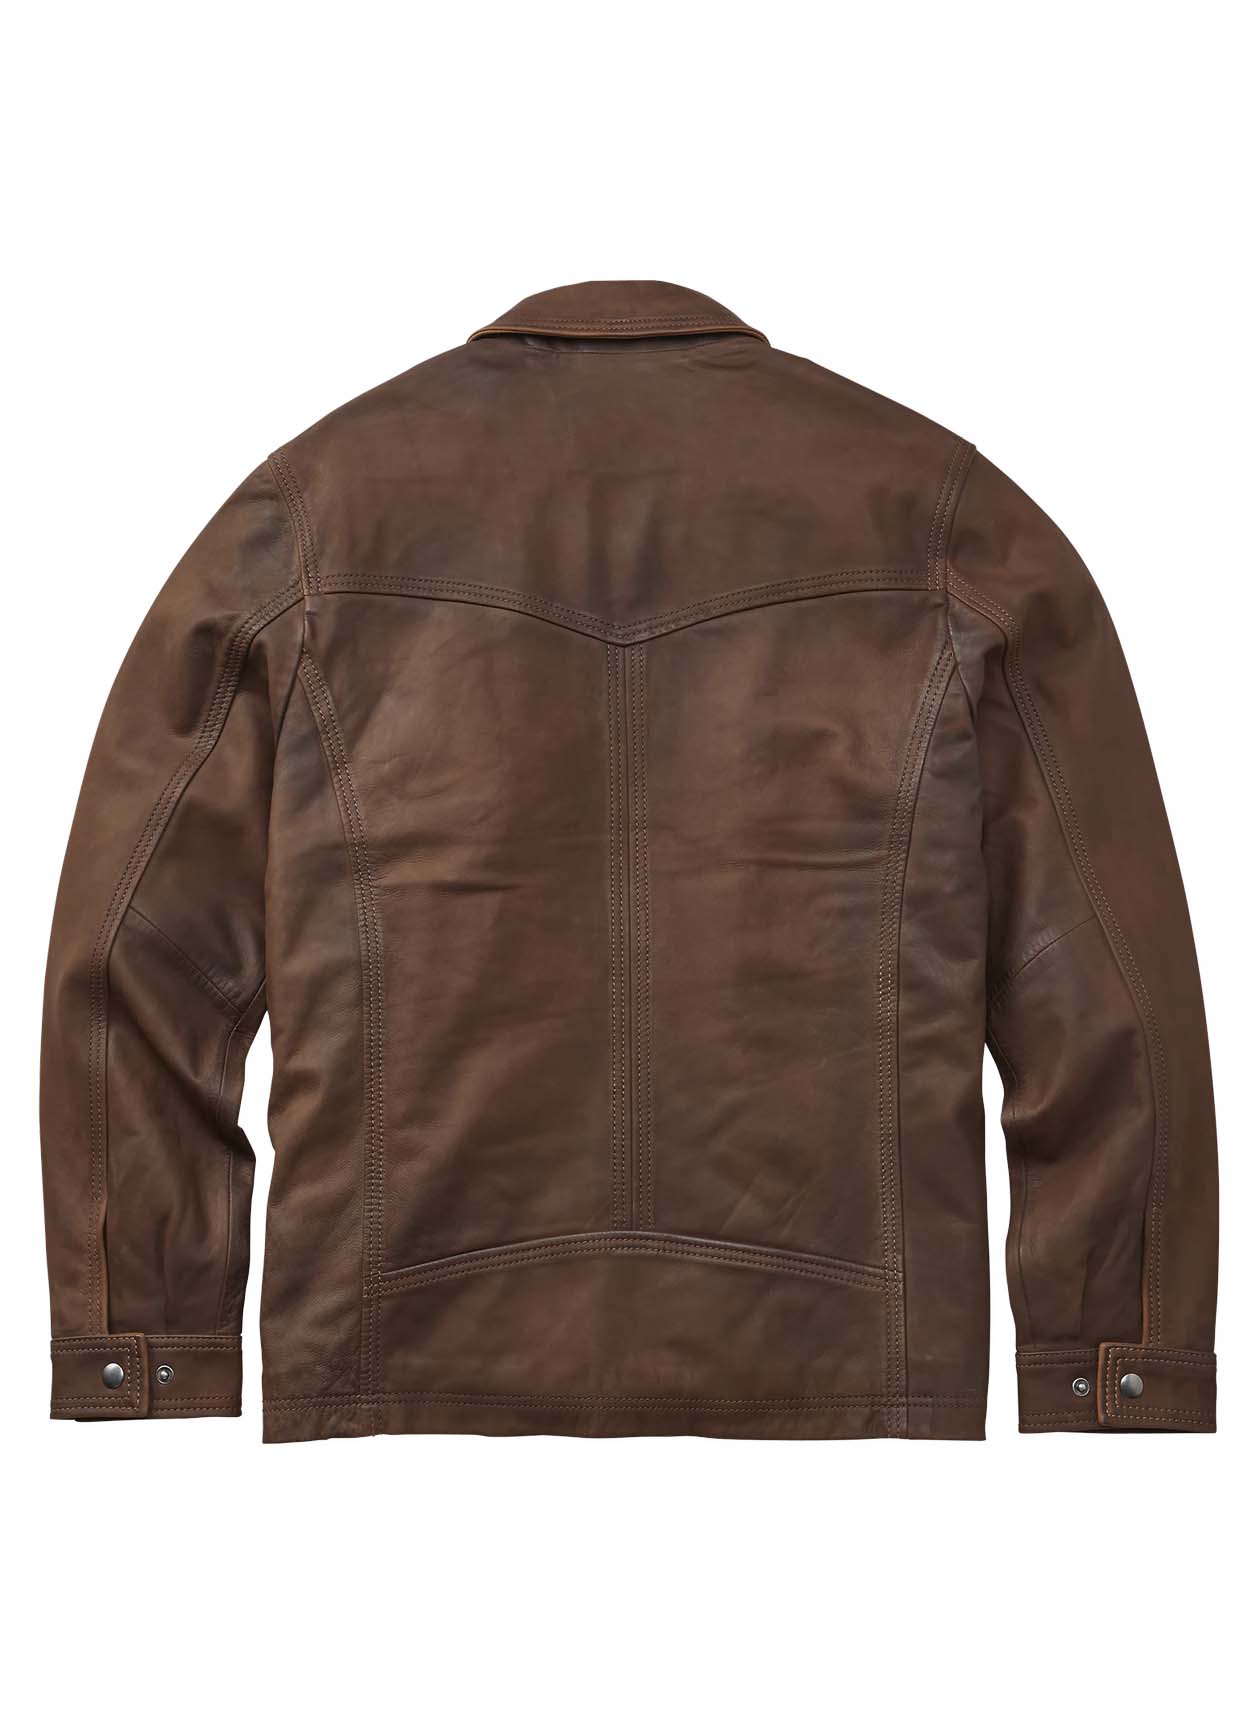 HICKORY LEATHER JACKET - PECAN